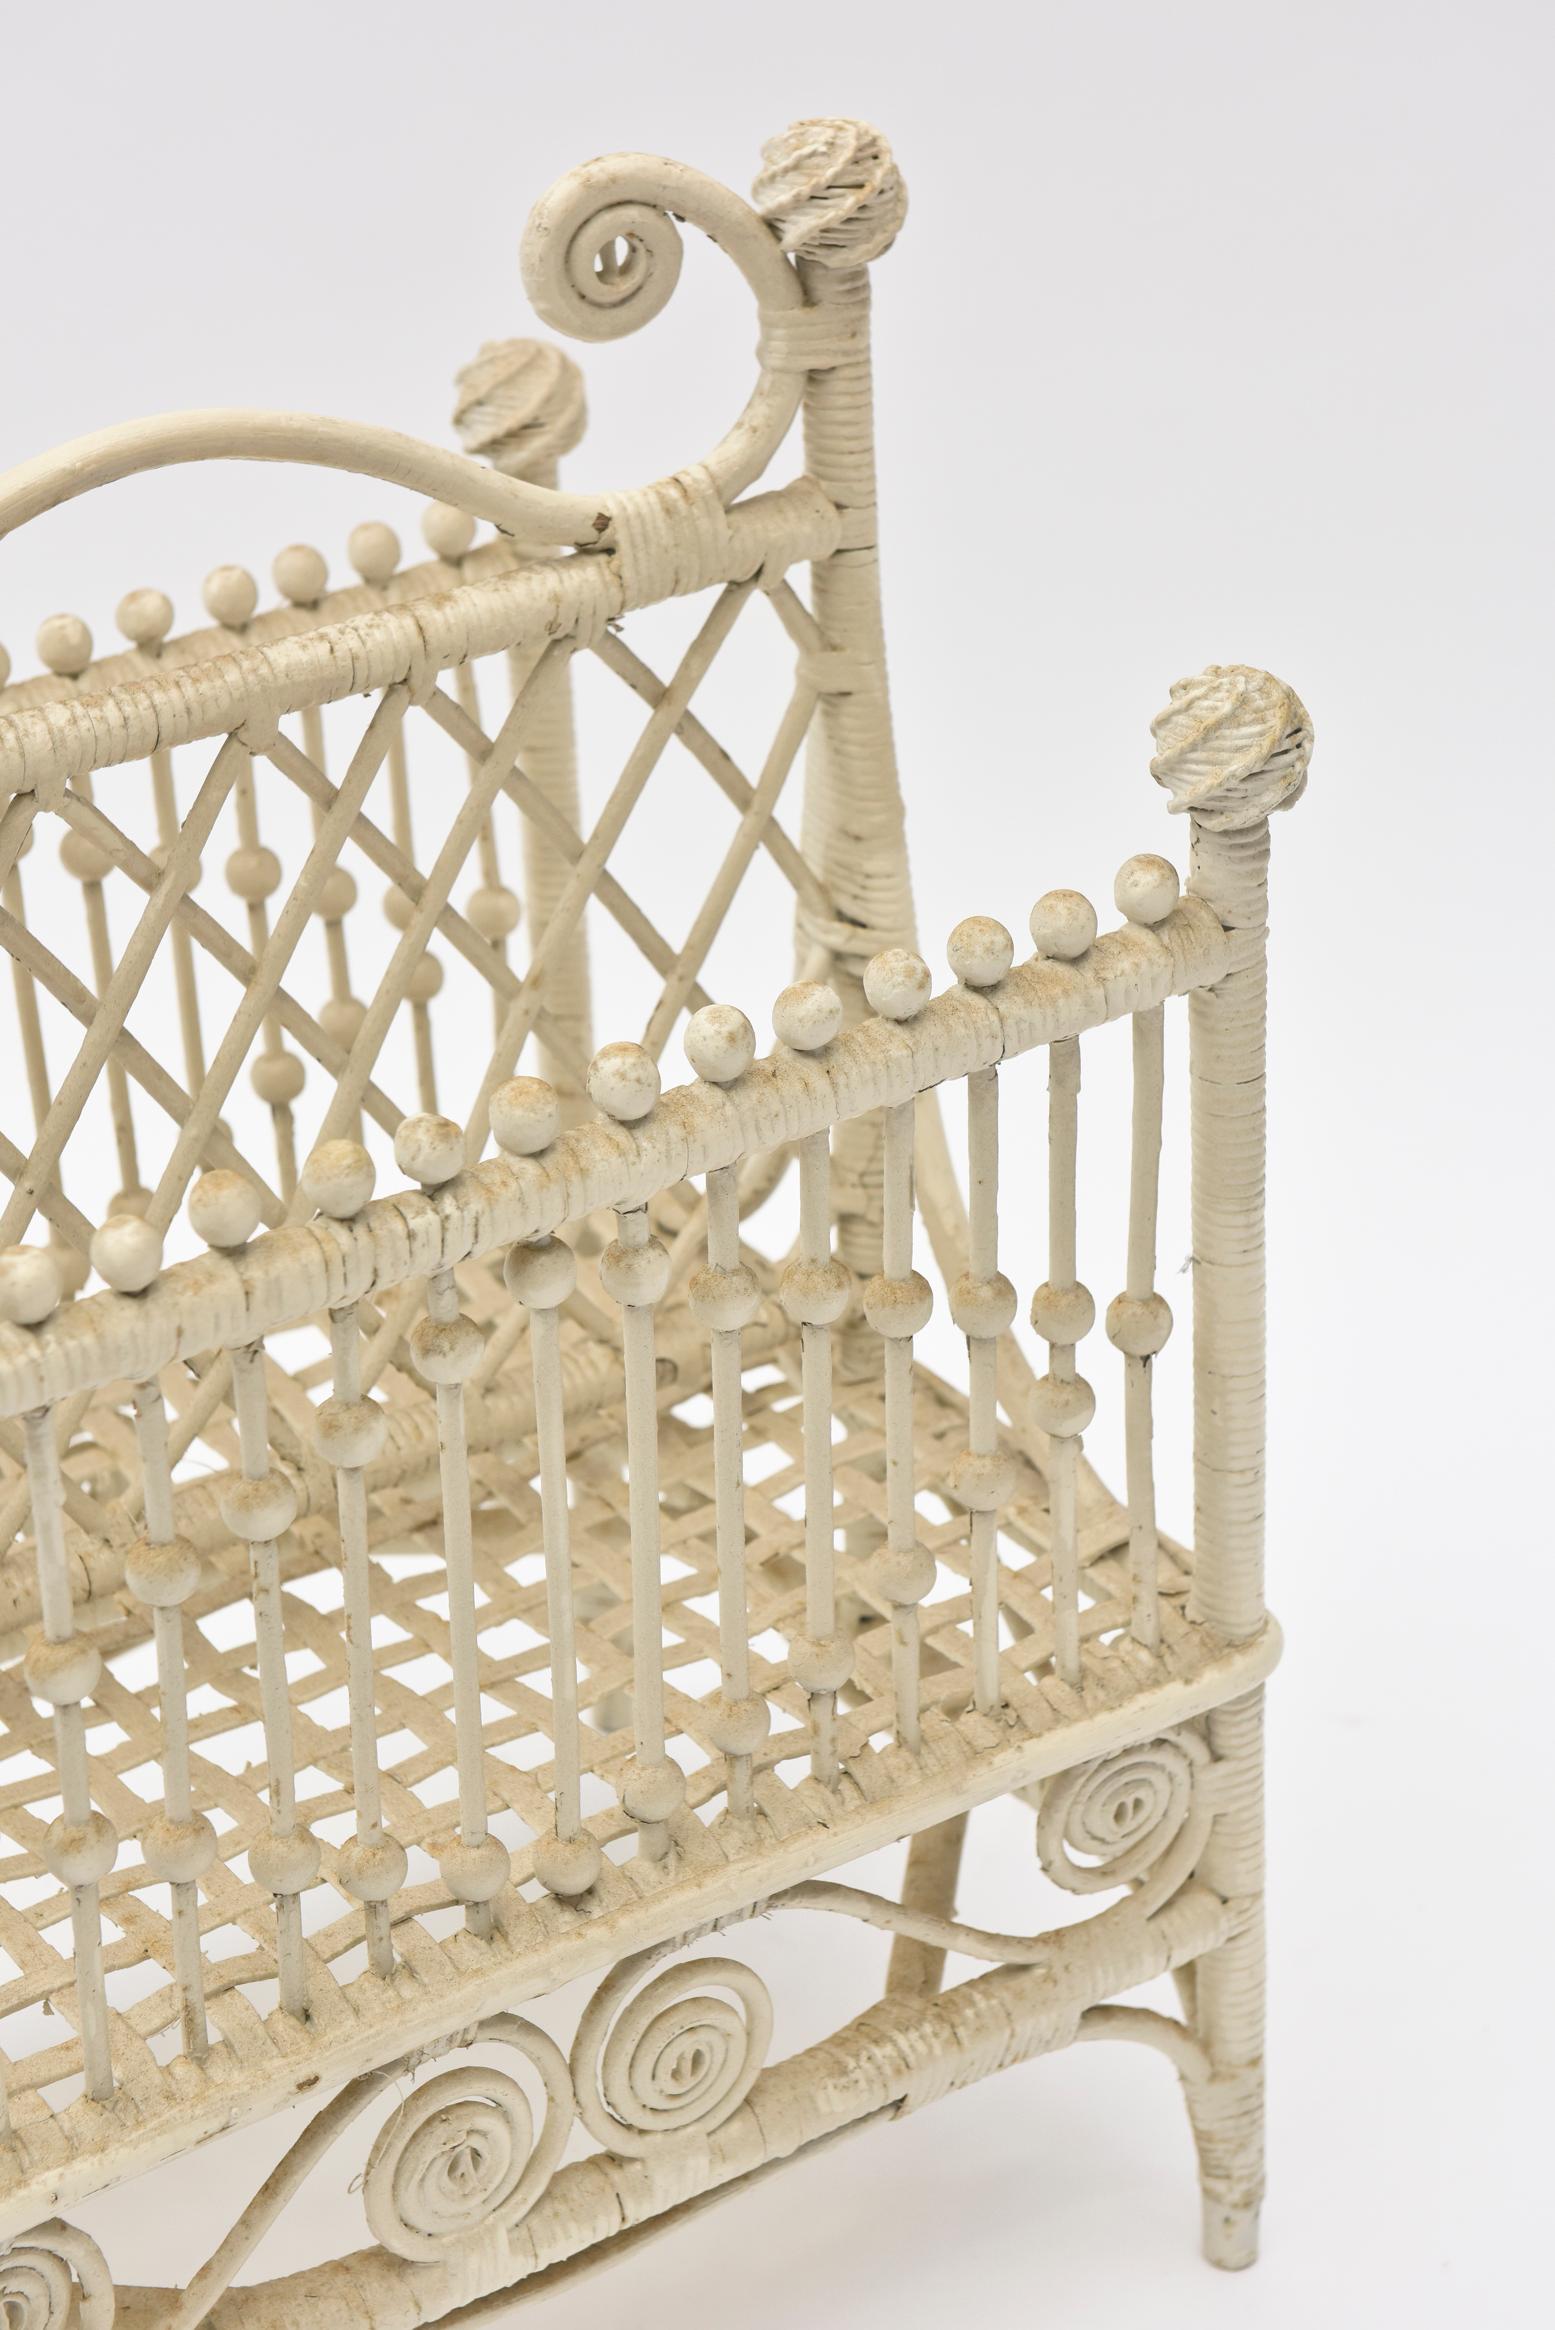 Wicker Ornate Music or Magazine Rack with Beads Curlicues and Woven Ball Finial In Good Condition For Sale In Miami Beach, FL